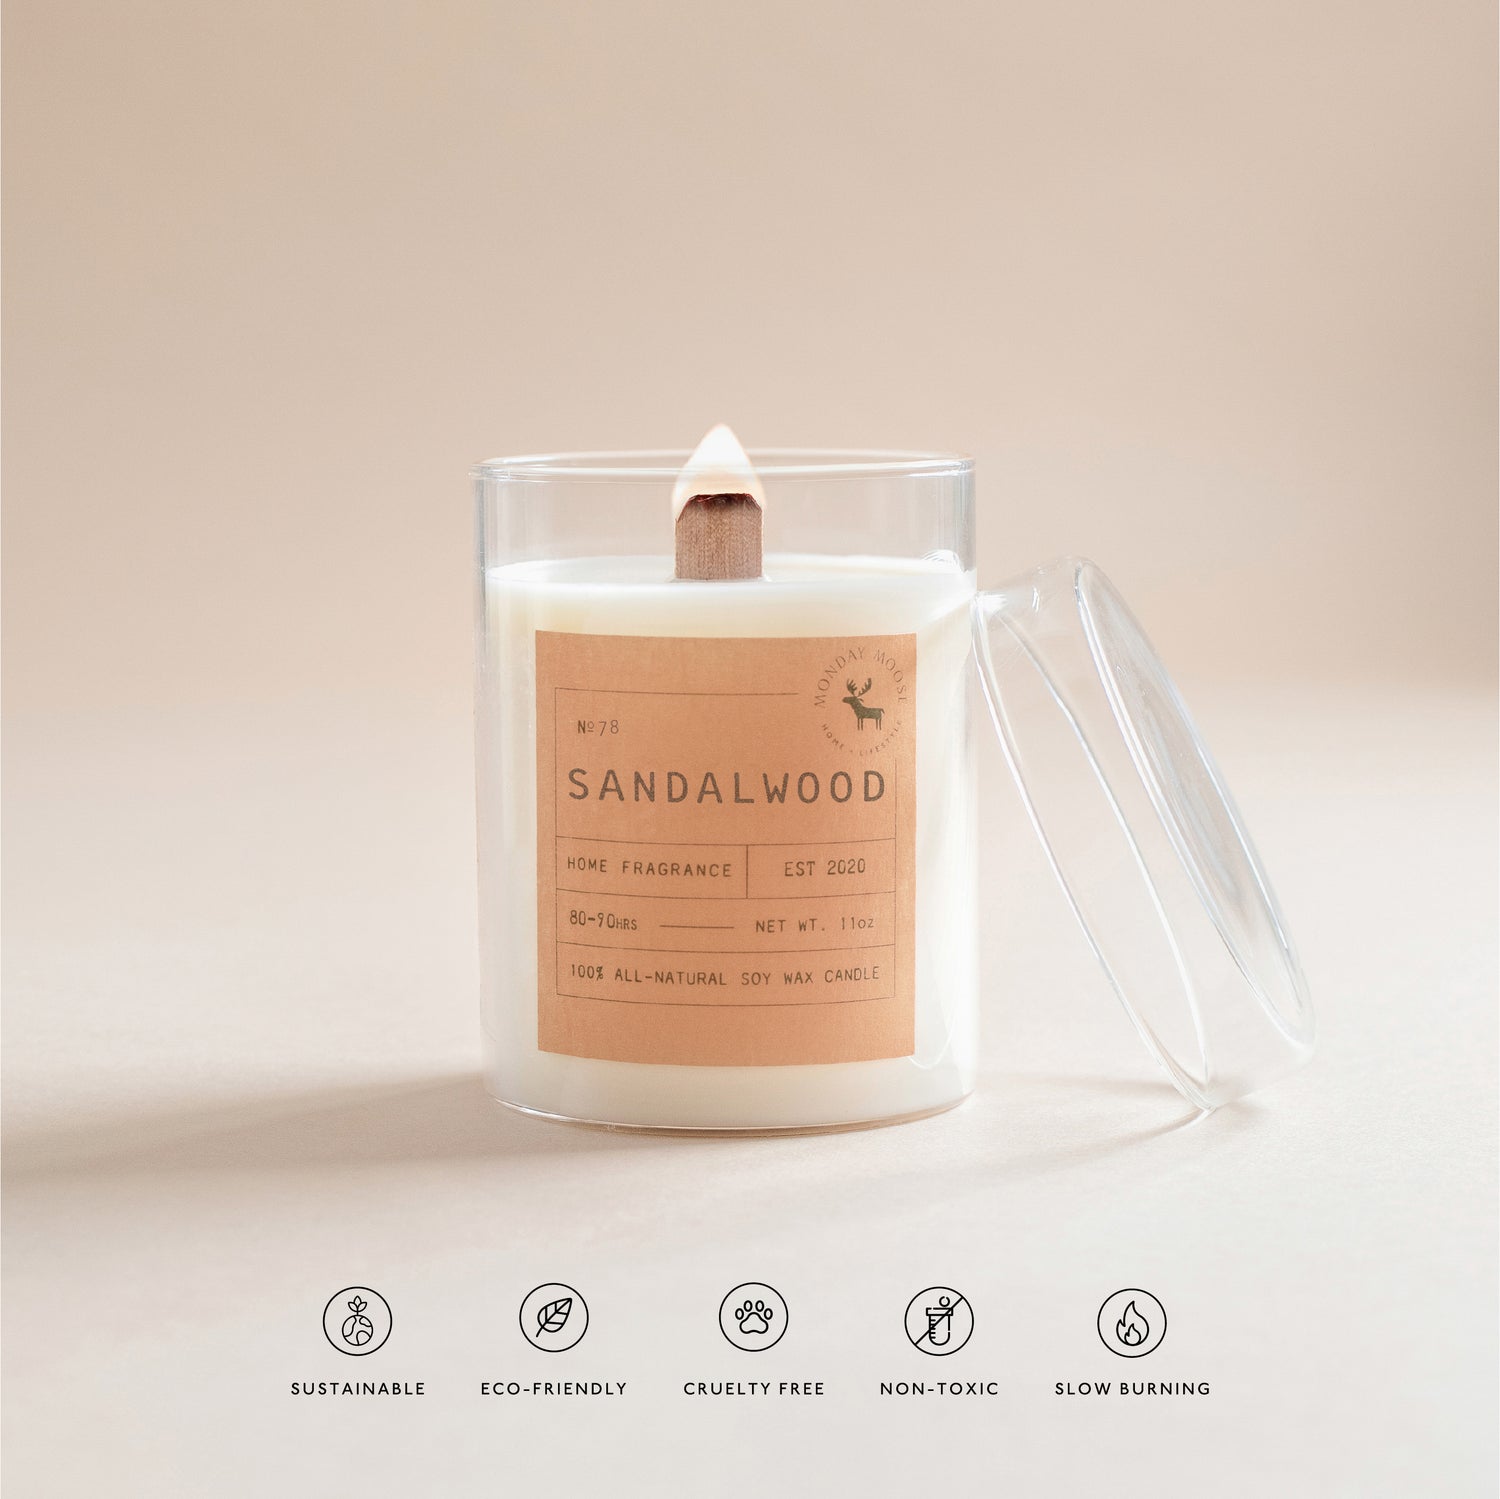 soy wax scented candle home fragrance sandalwood